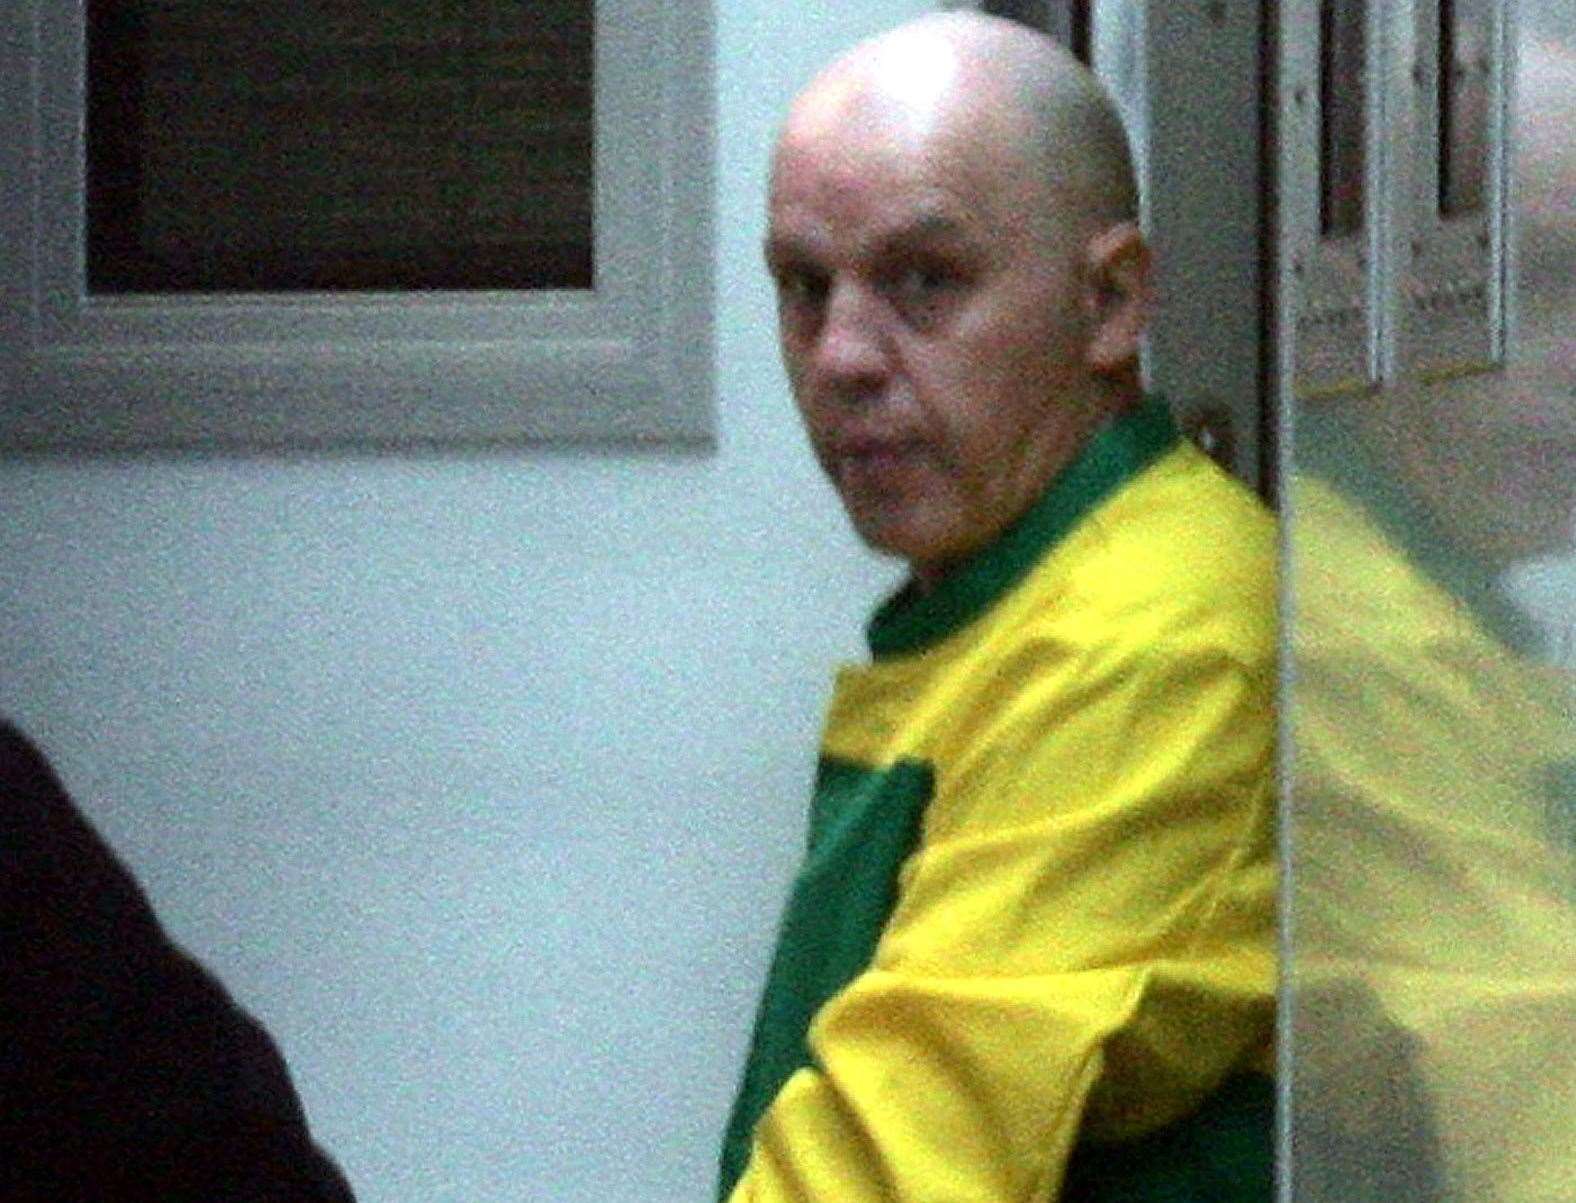 Michael Stone arrives at the High Court in 2005 for a previous appeal hearing